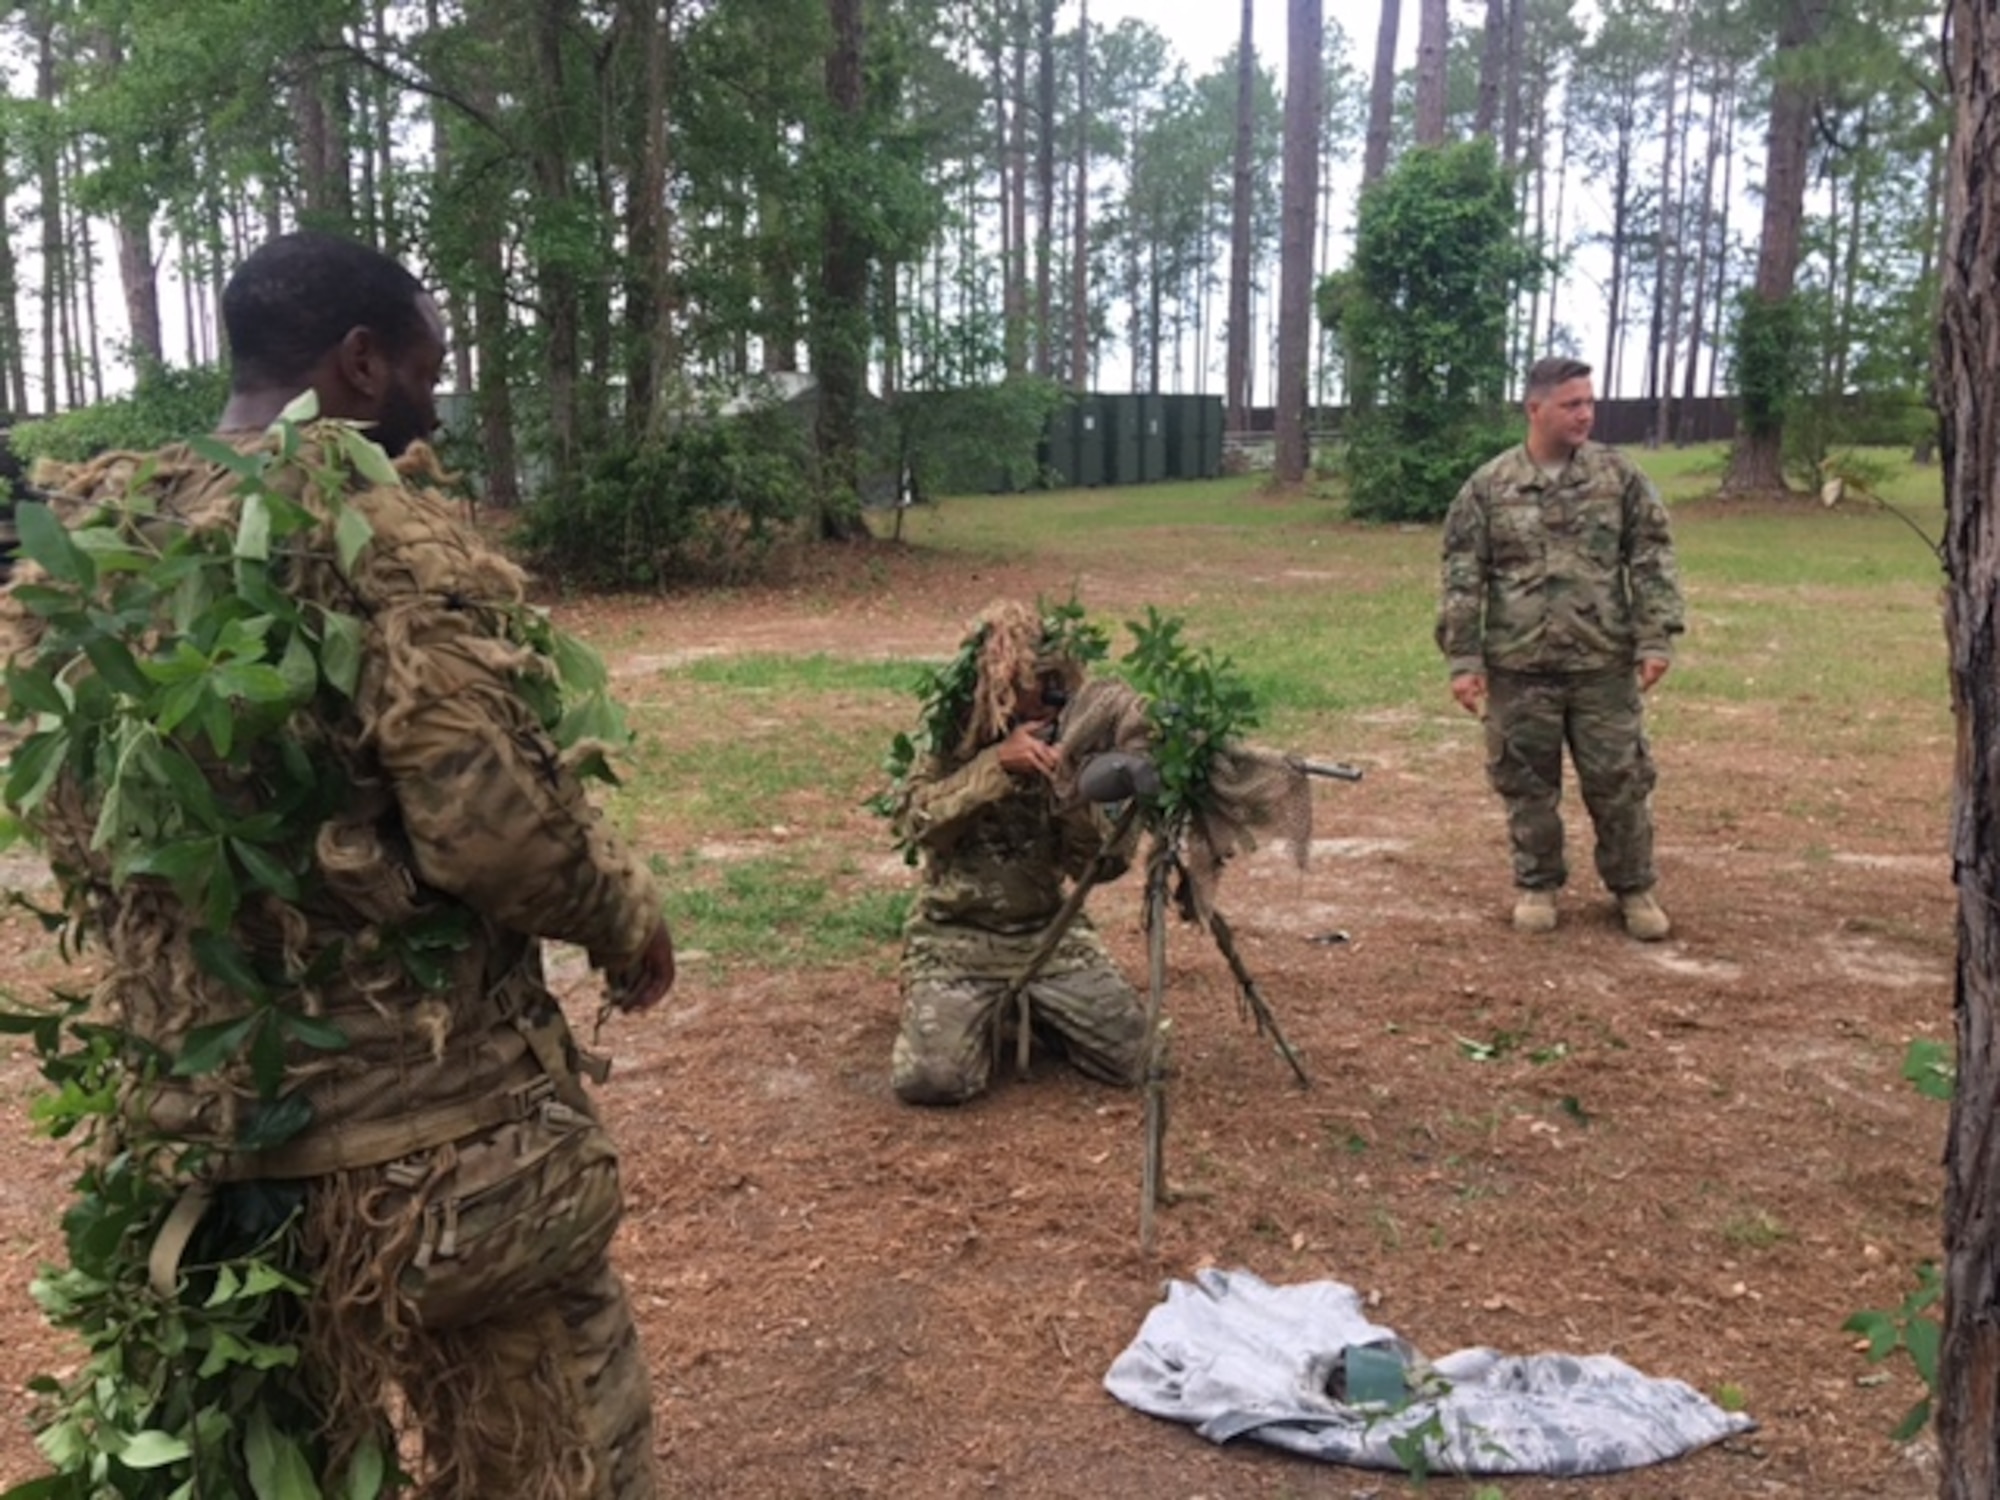 Class members from Emerge Moody receive a brief from Airmen in the 820th Base Defense Group May 2, 2017, at Moody Air Force Base, Ga. Emerge Moody spent the day with the 820th BDG learning about the organization’s mission and capabilities. (Courtesy Photo)